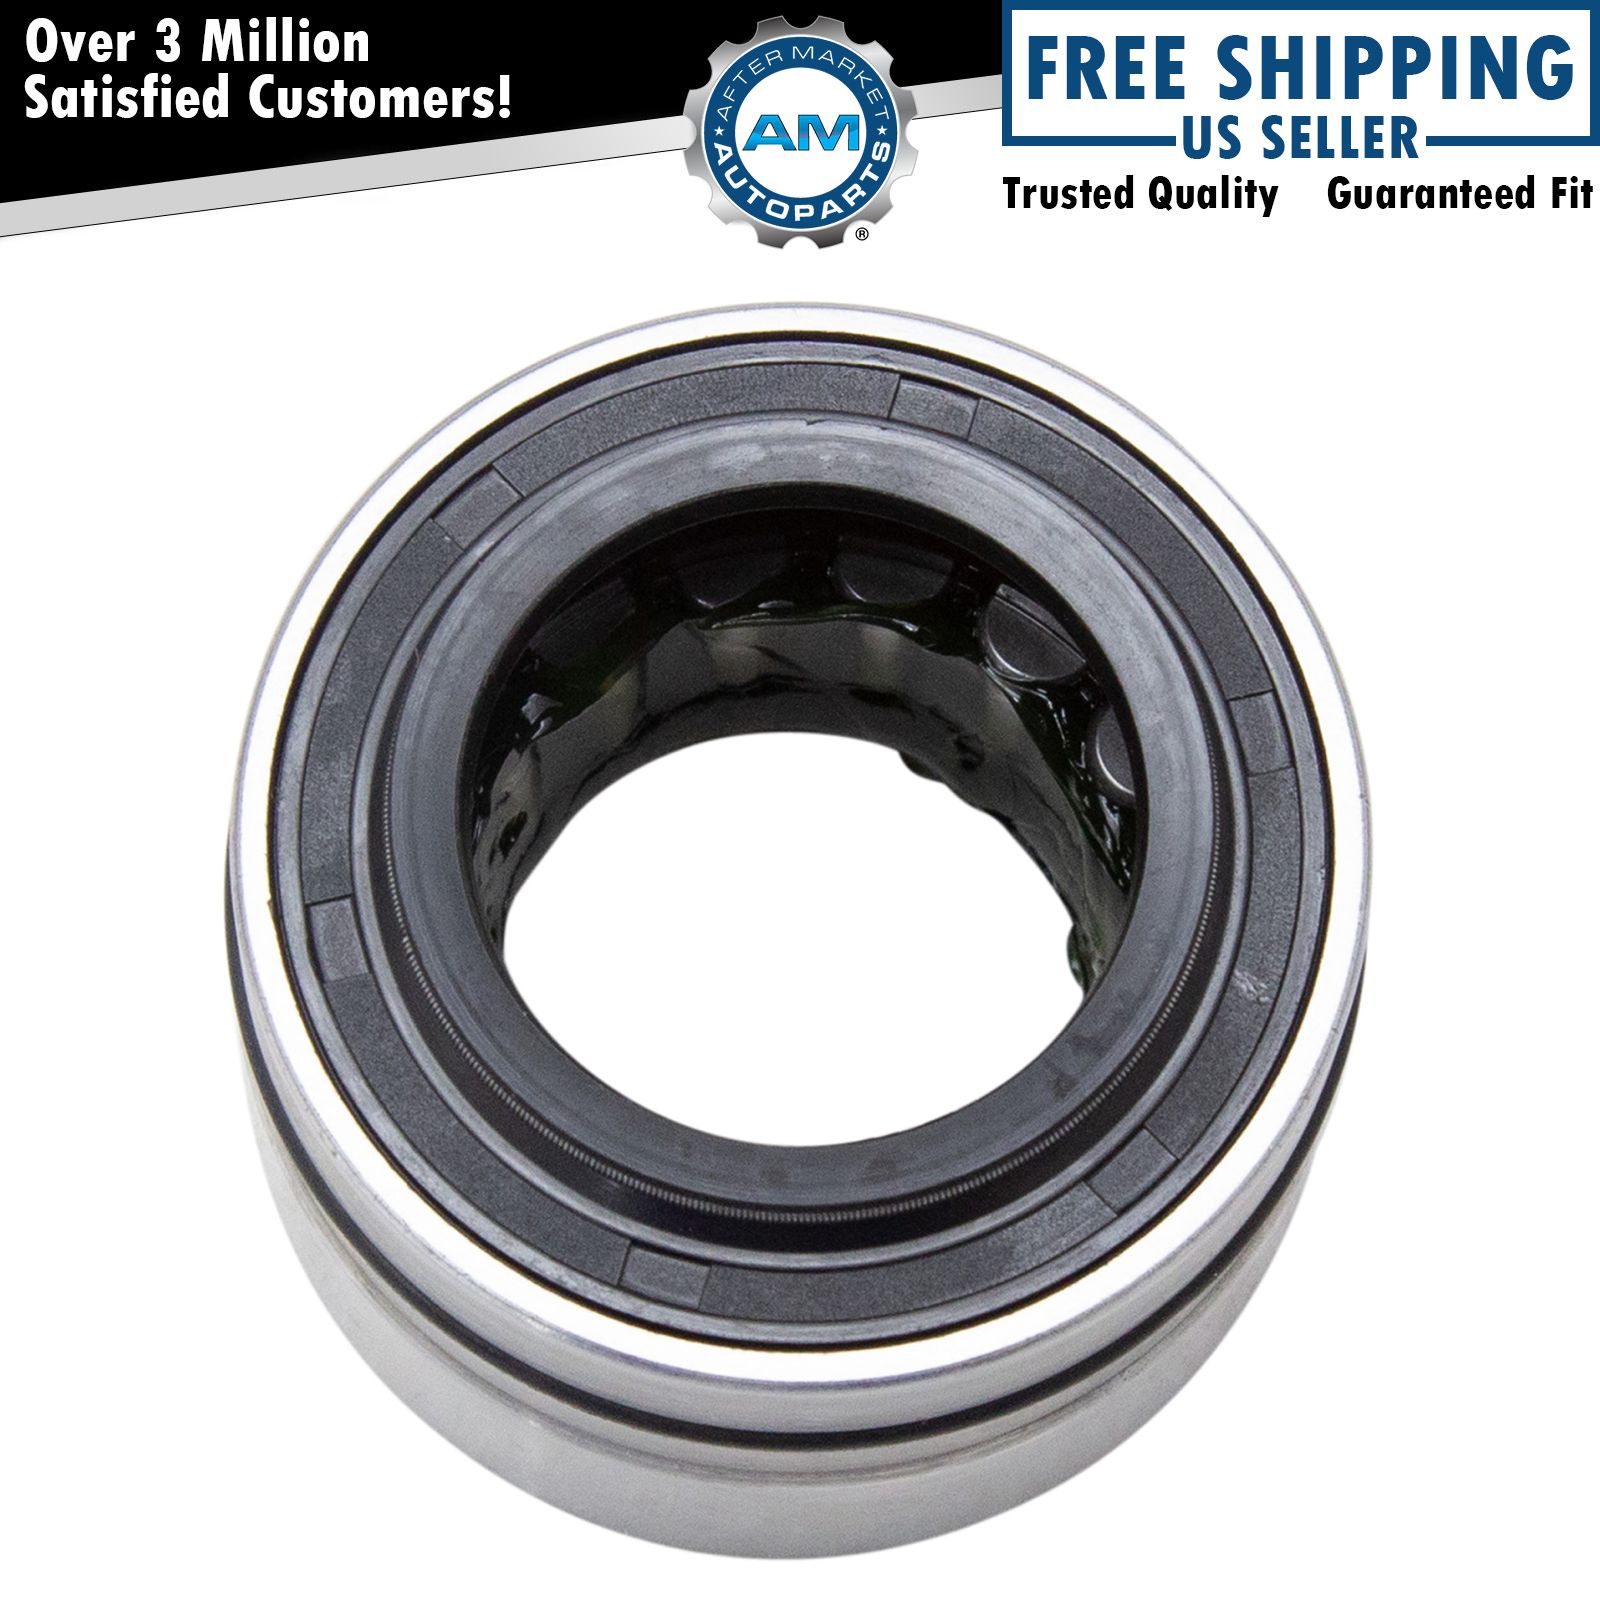 Rear Axle Shaft Repair Bearing & Seal Kit LH or RH Side for Ford Chevy Mercury